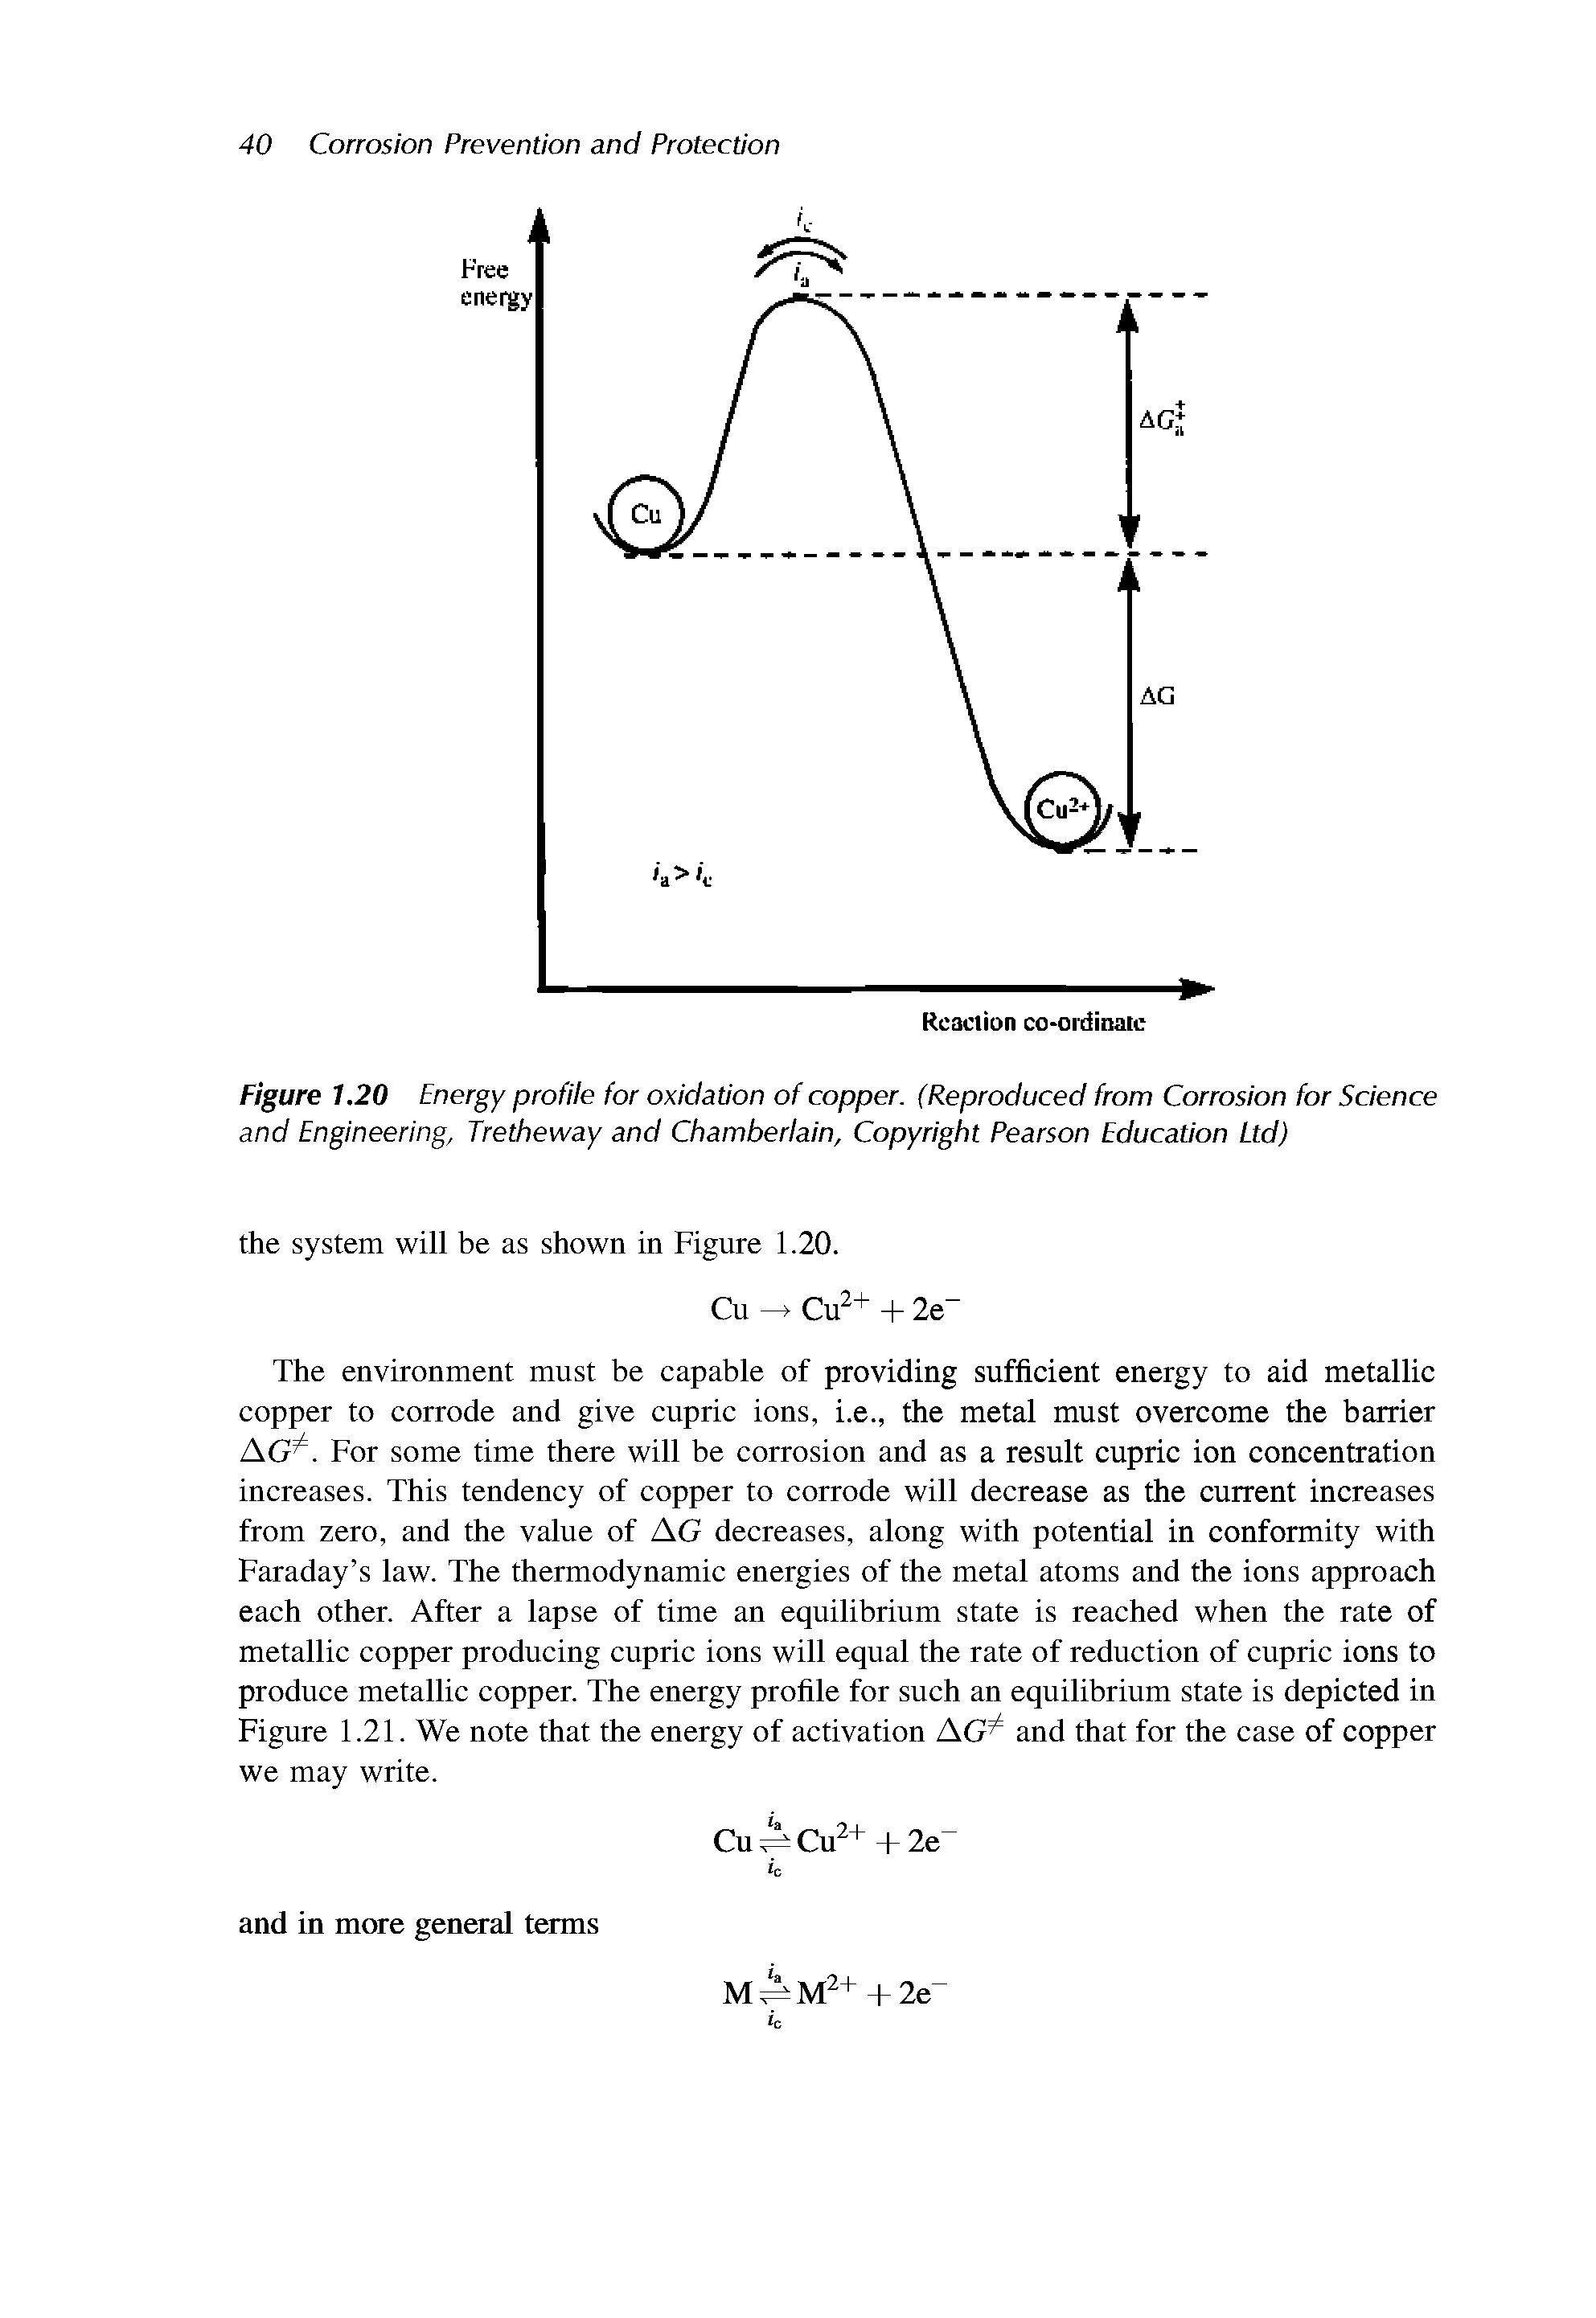 Figure 1.20 Energy profile for oxidation of copper. (Reproduced from Corrosion for Science and Engineering, Tretheway and Chamberlain, Copyright Pearson Education Ltd)...